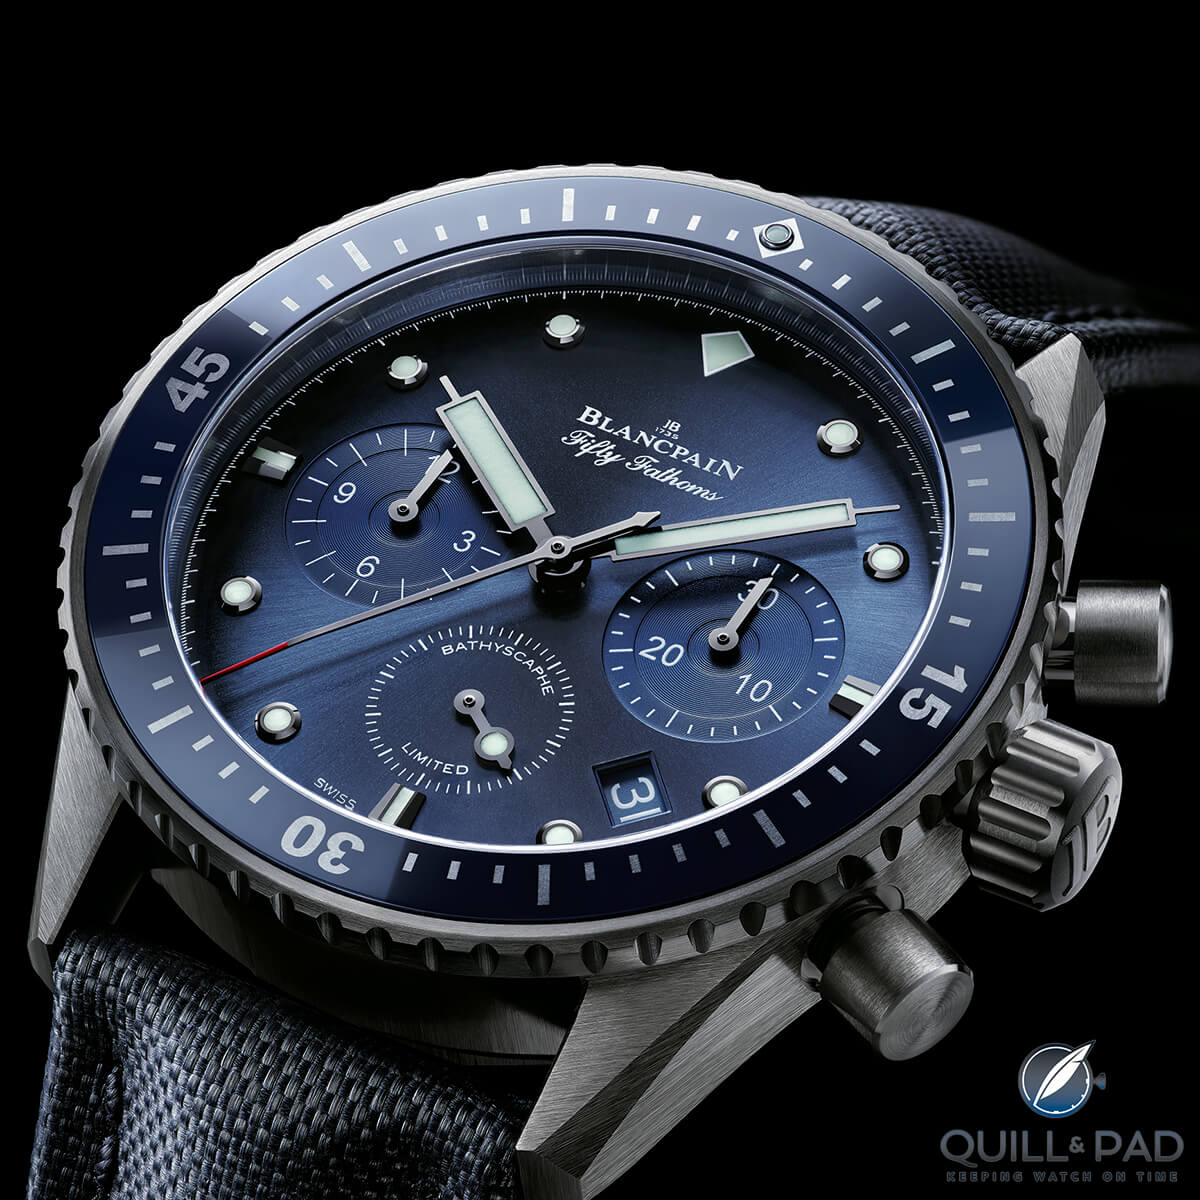 Blancpain Fifty Fathoms Ocean Commitment Bathyscaphe Chronograph Flyback